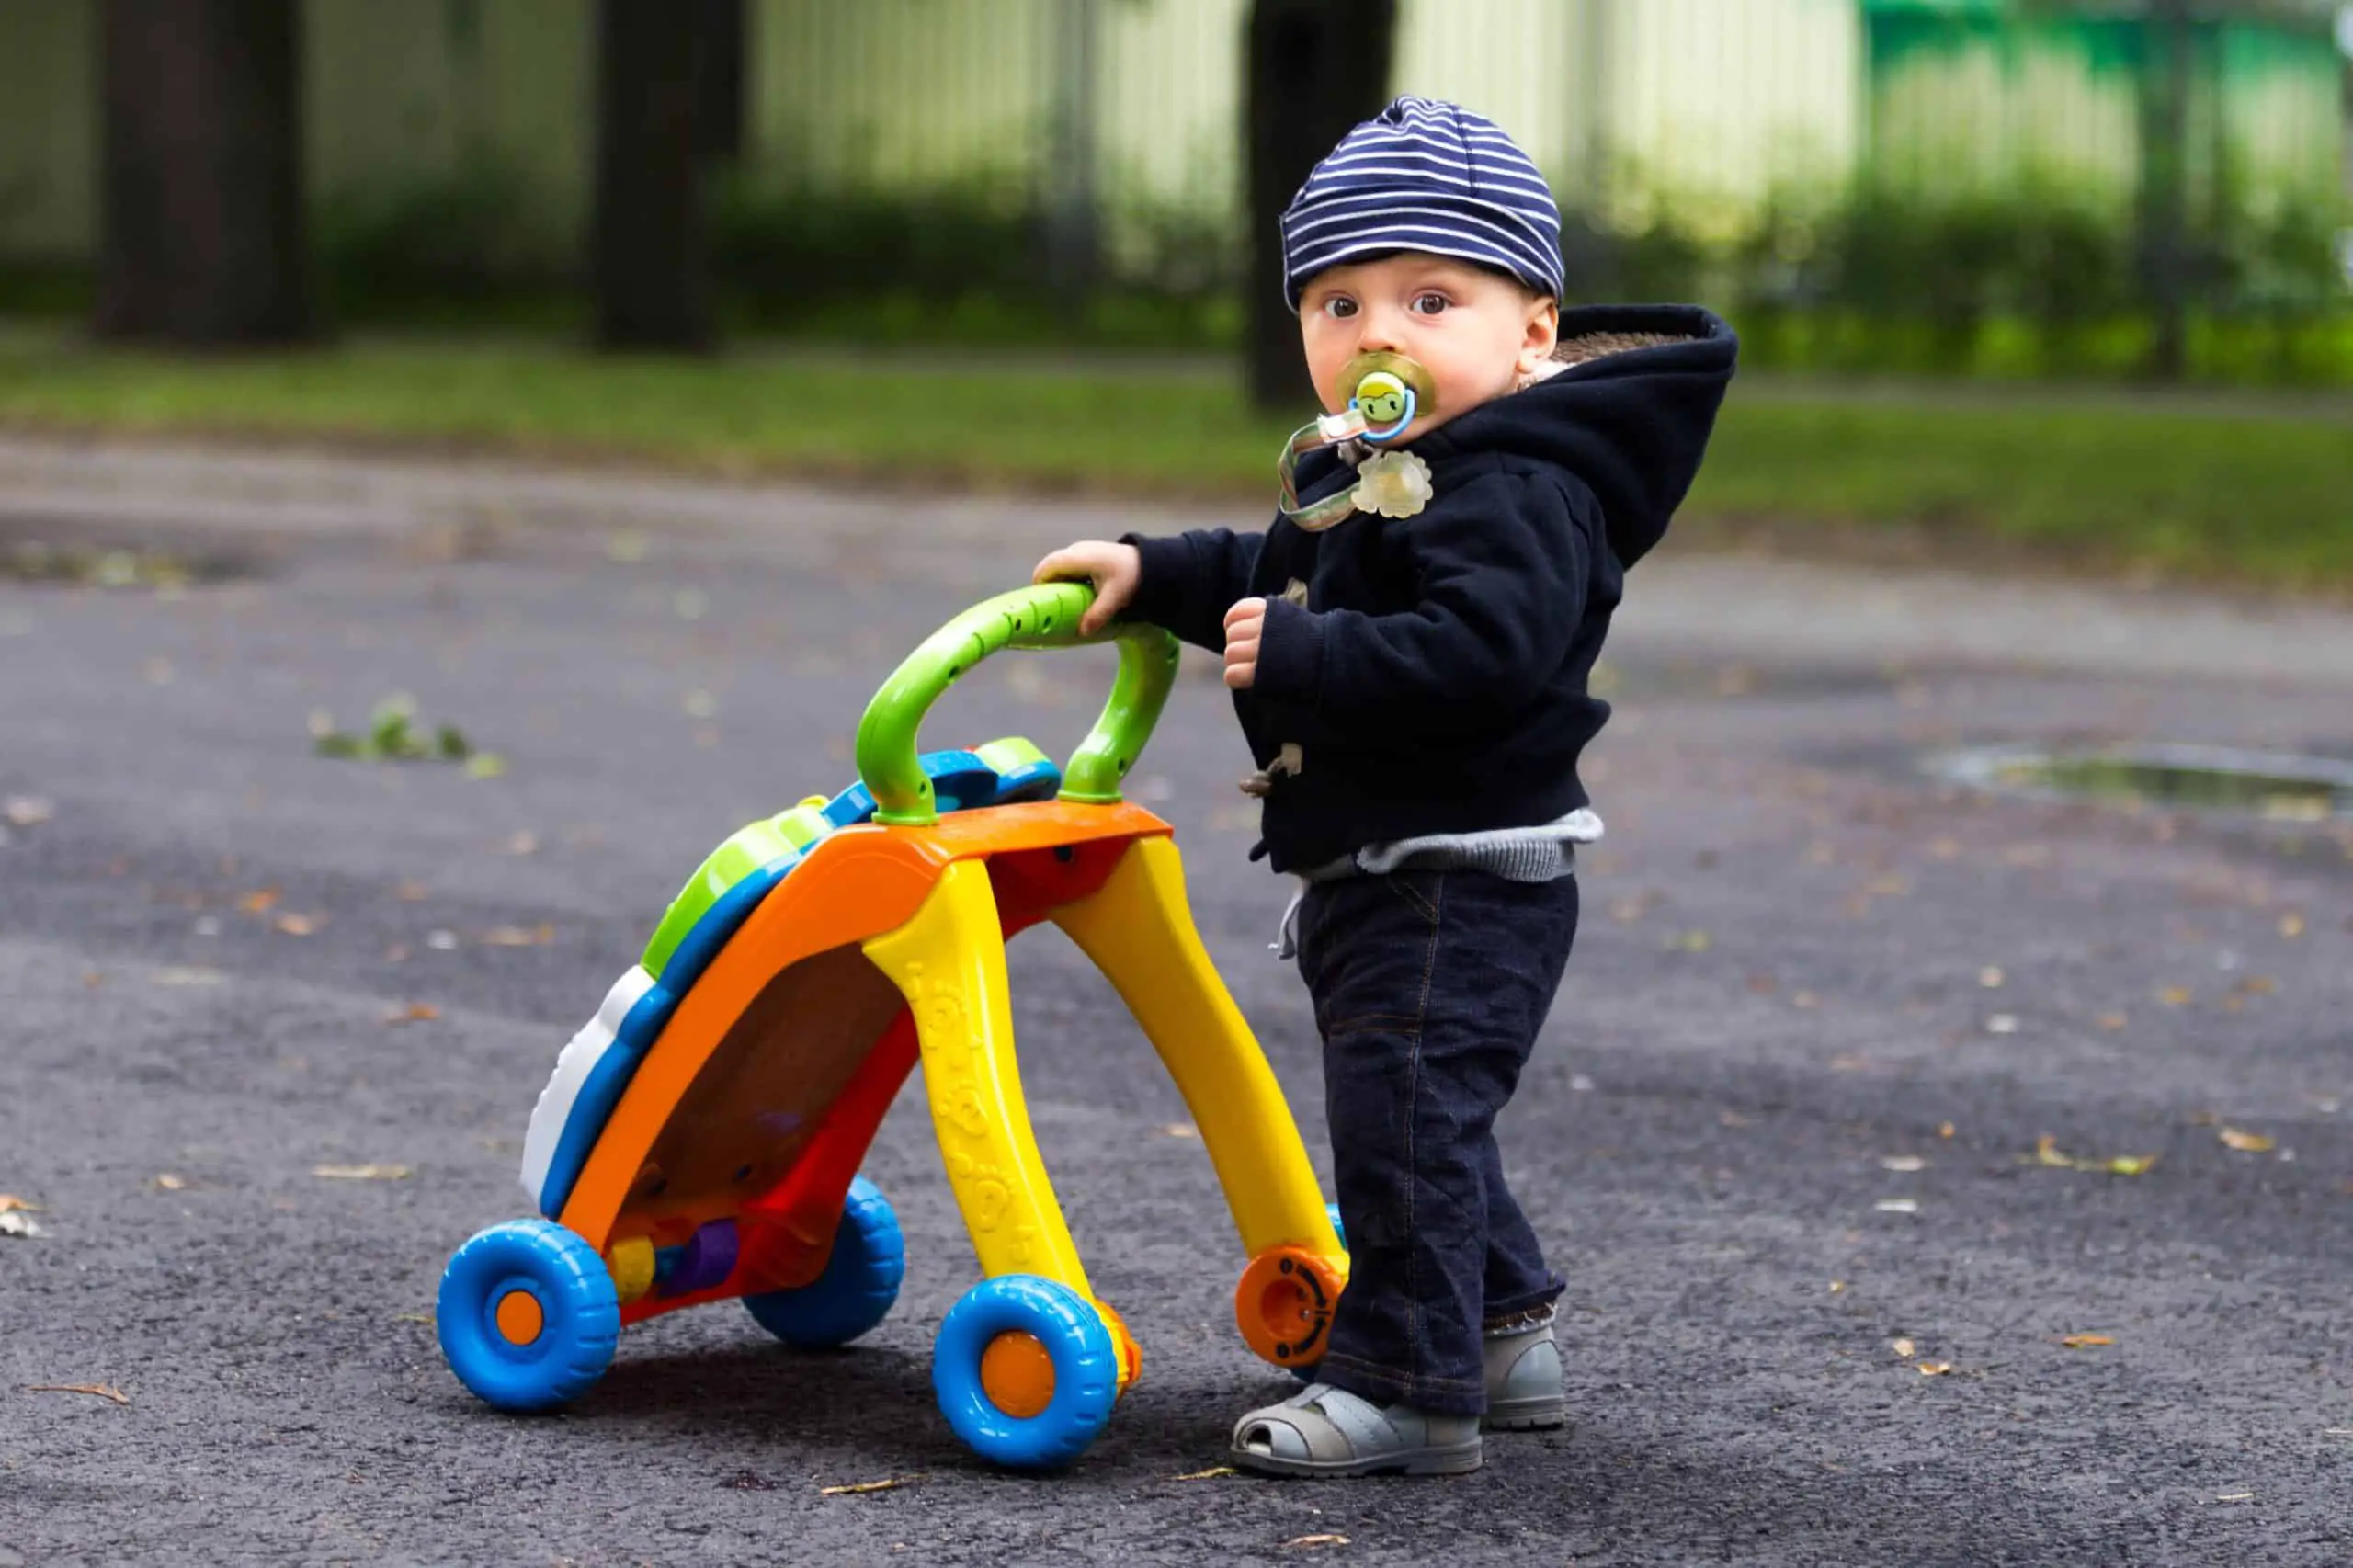 Top 10 Best Walking Toys for Baby in 2022 Reviews and Buying Guide